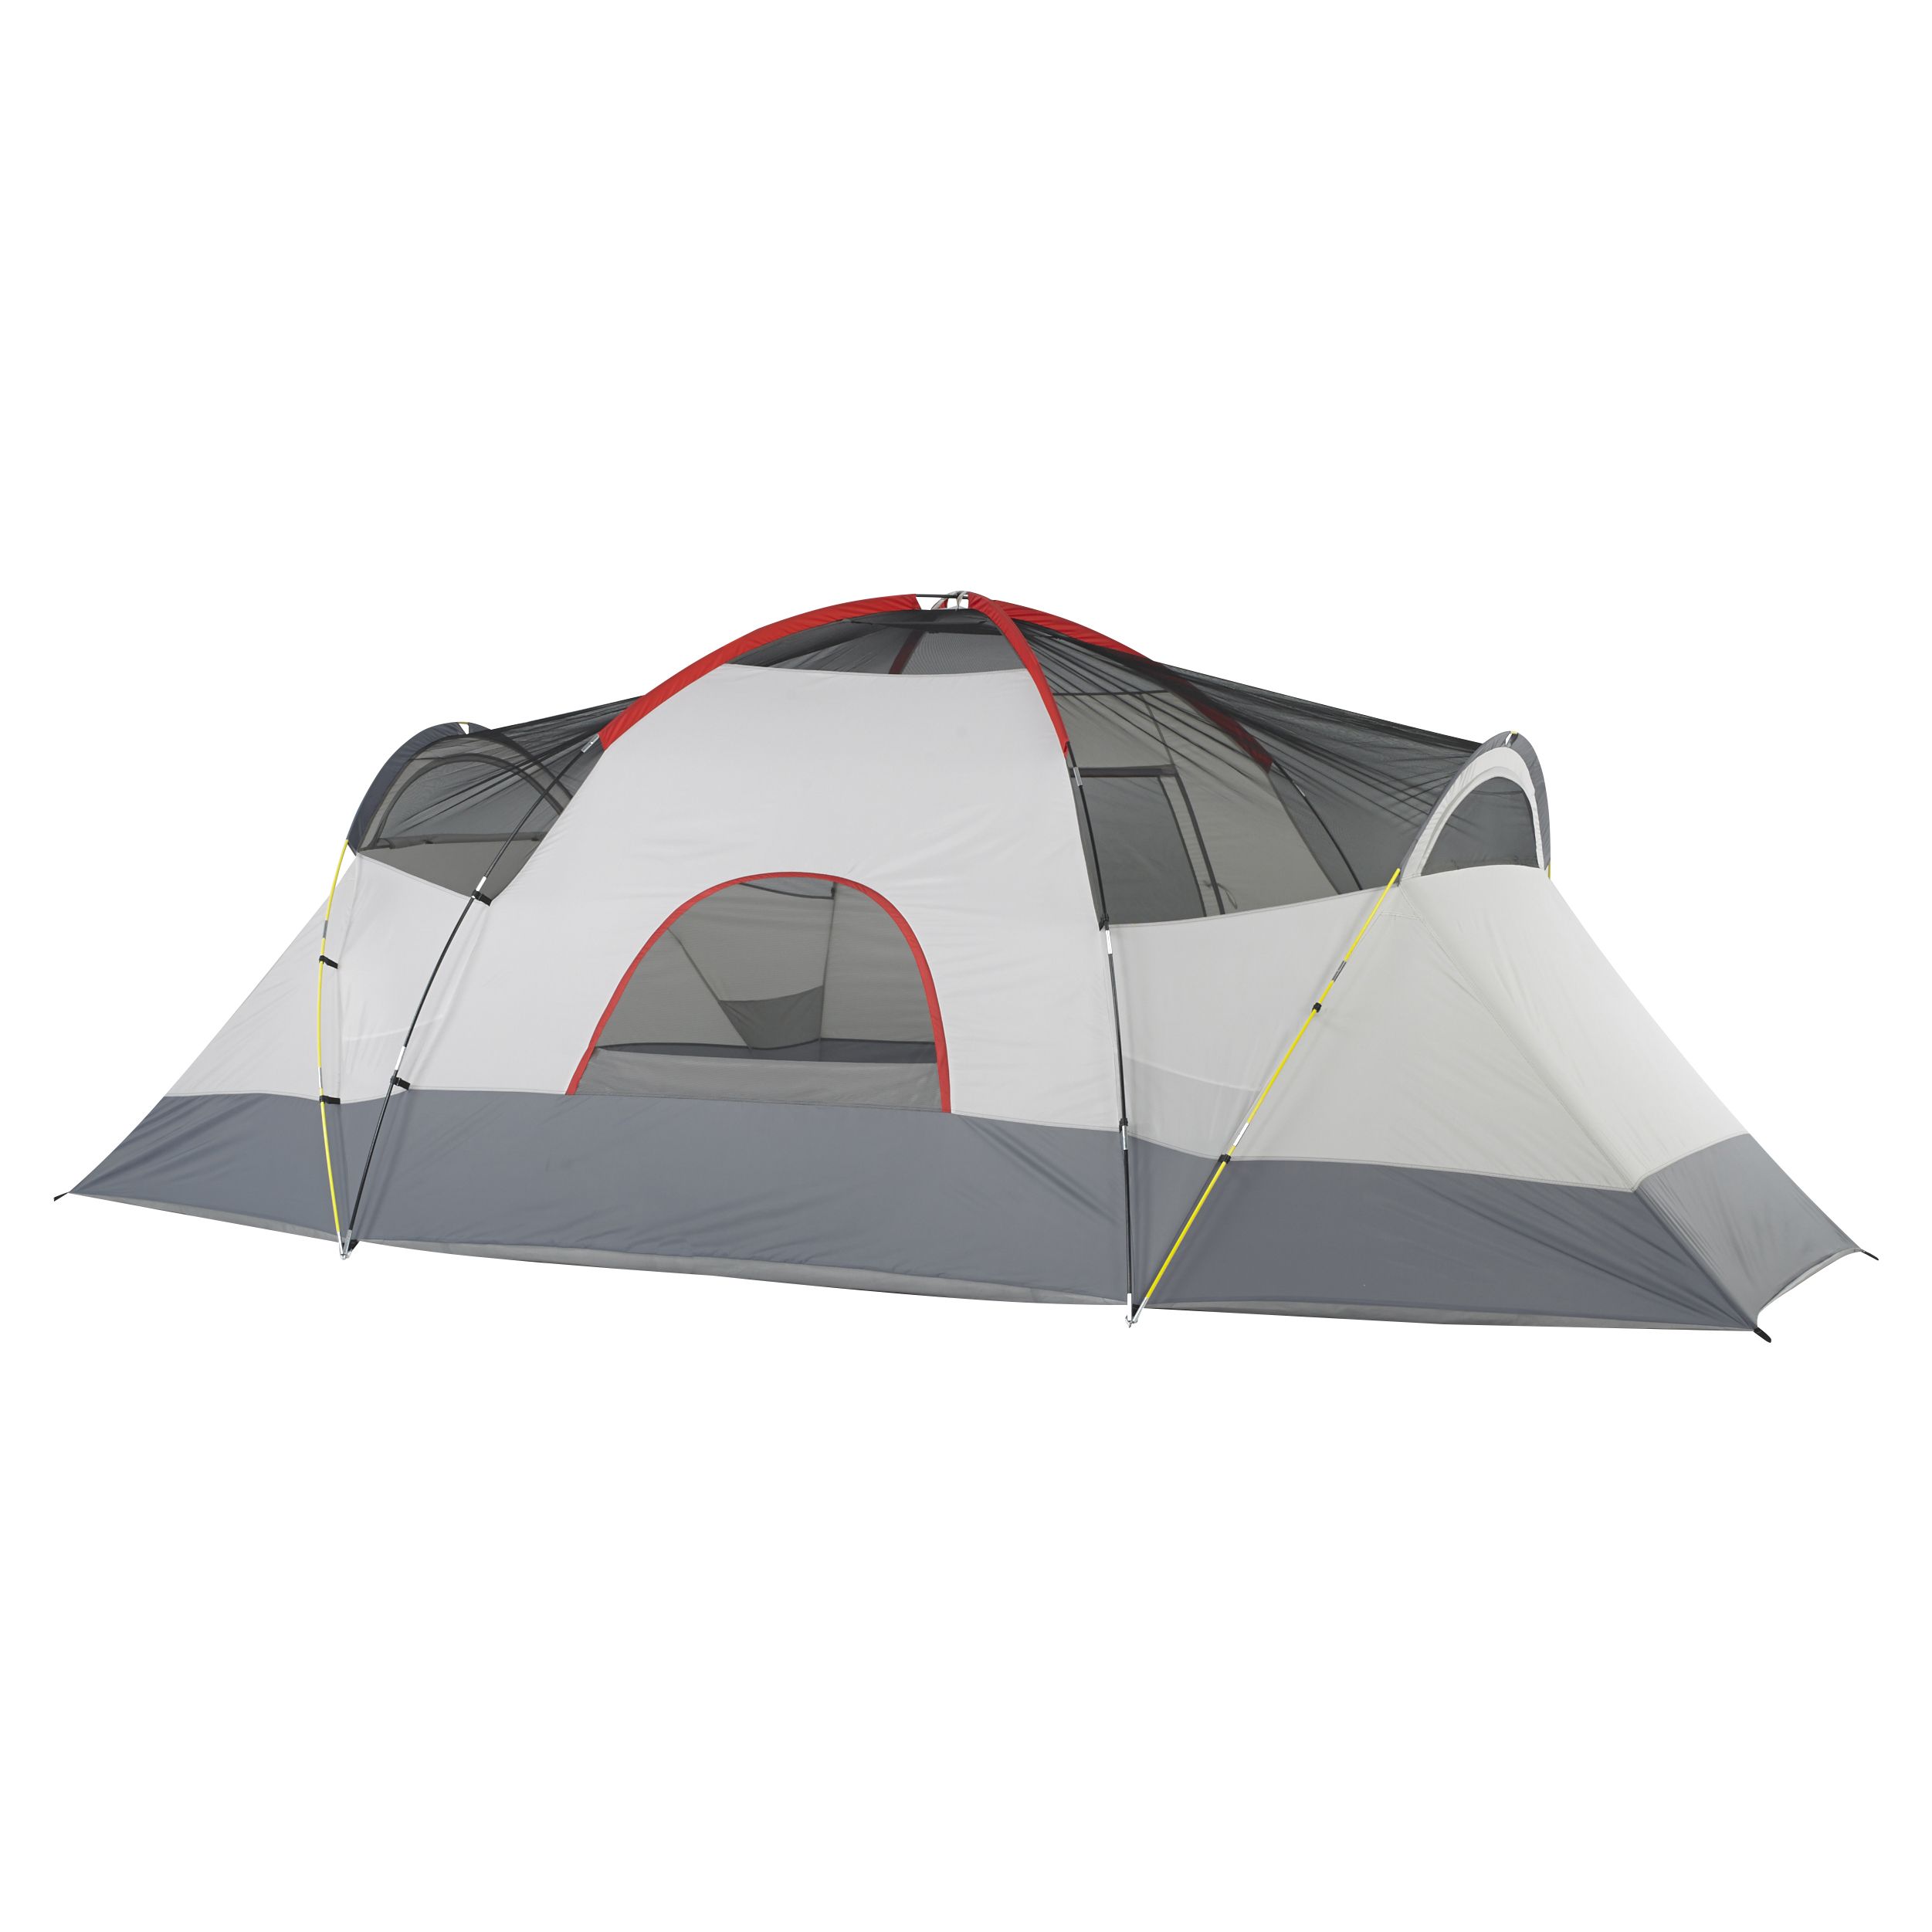 Ozark Trail 9-Person Weatherbuster® Dome Tent, with Built-in Mud Mat - image 4 of 7